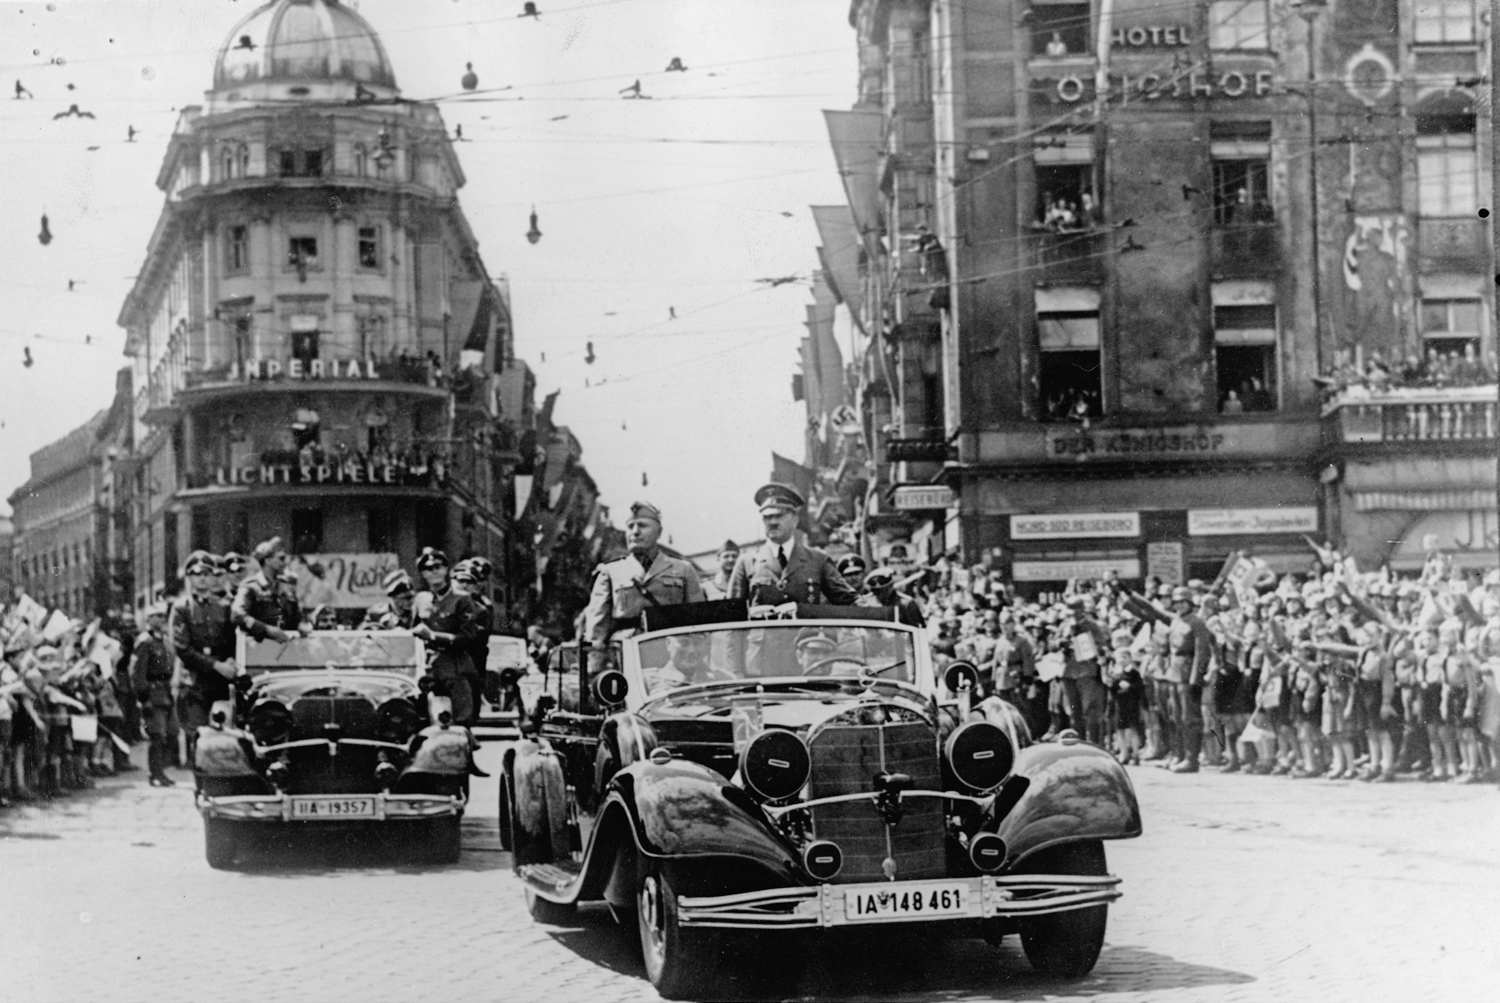 Adolf Hitler and Benito Mussolini on a car parade through Munich